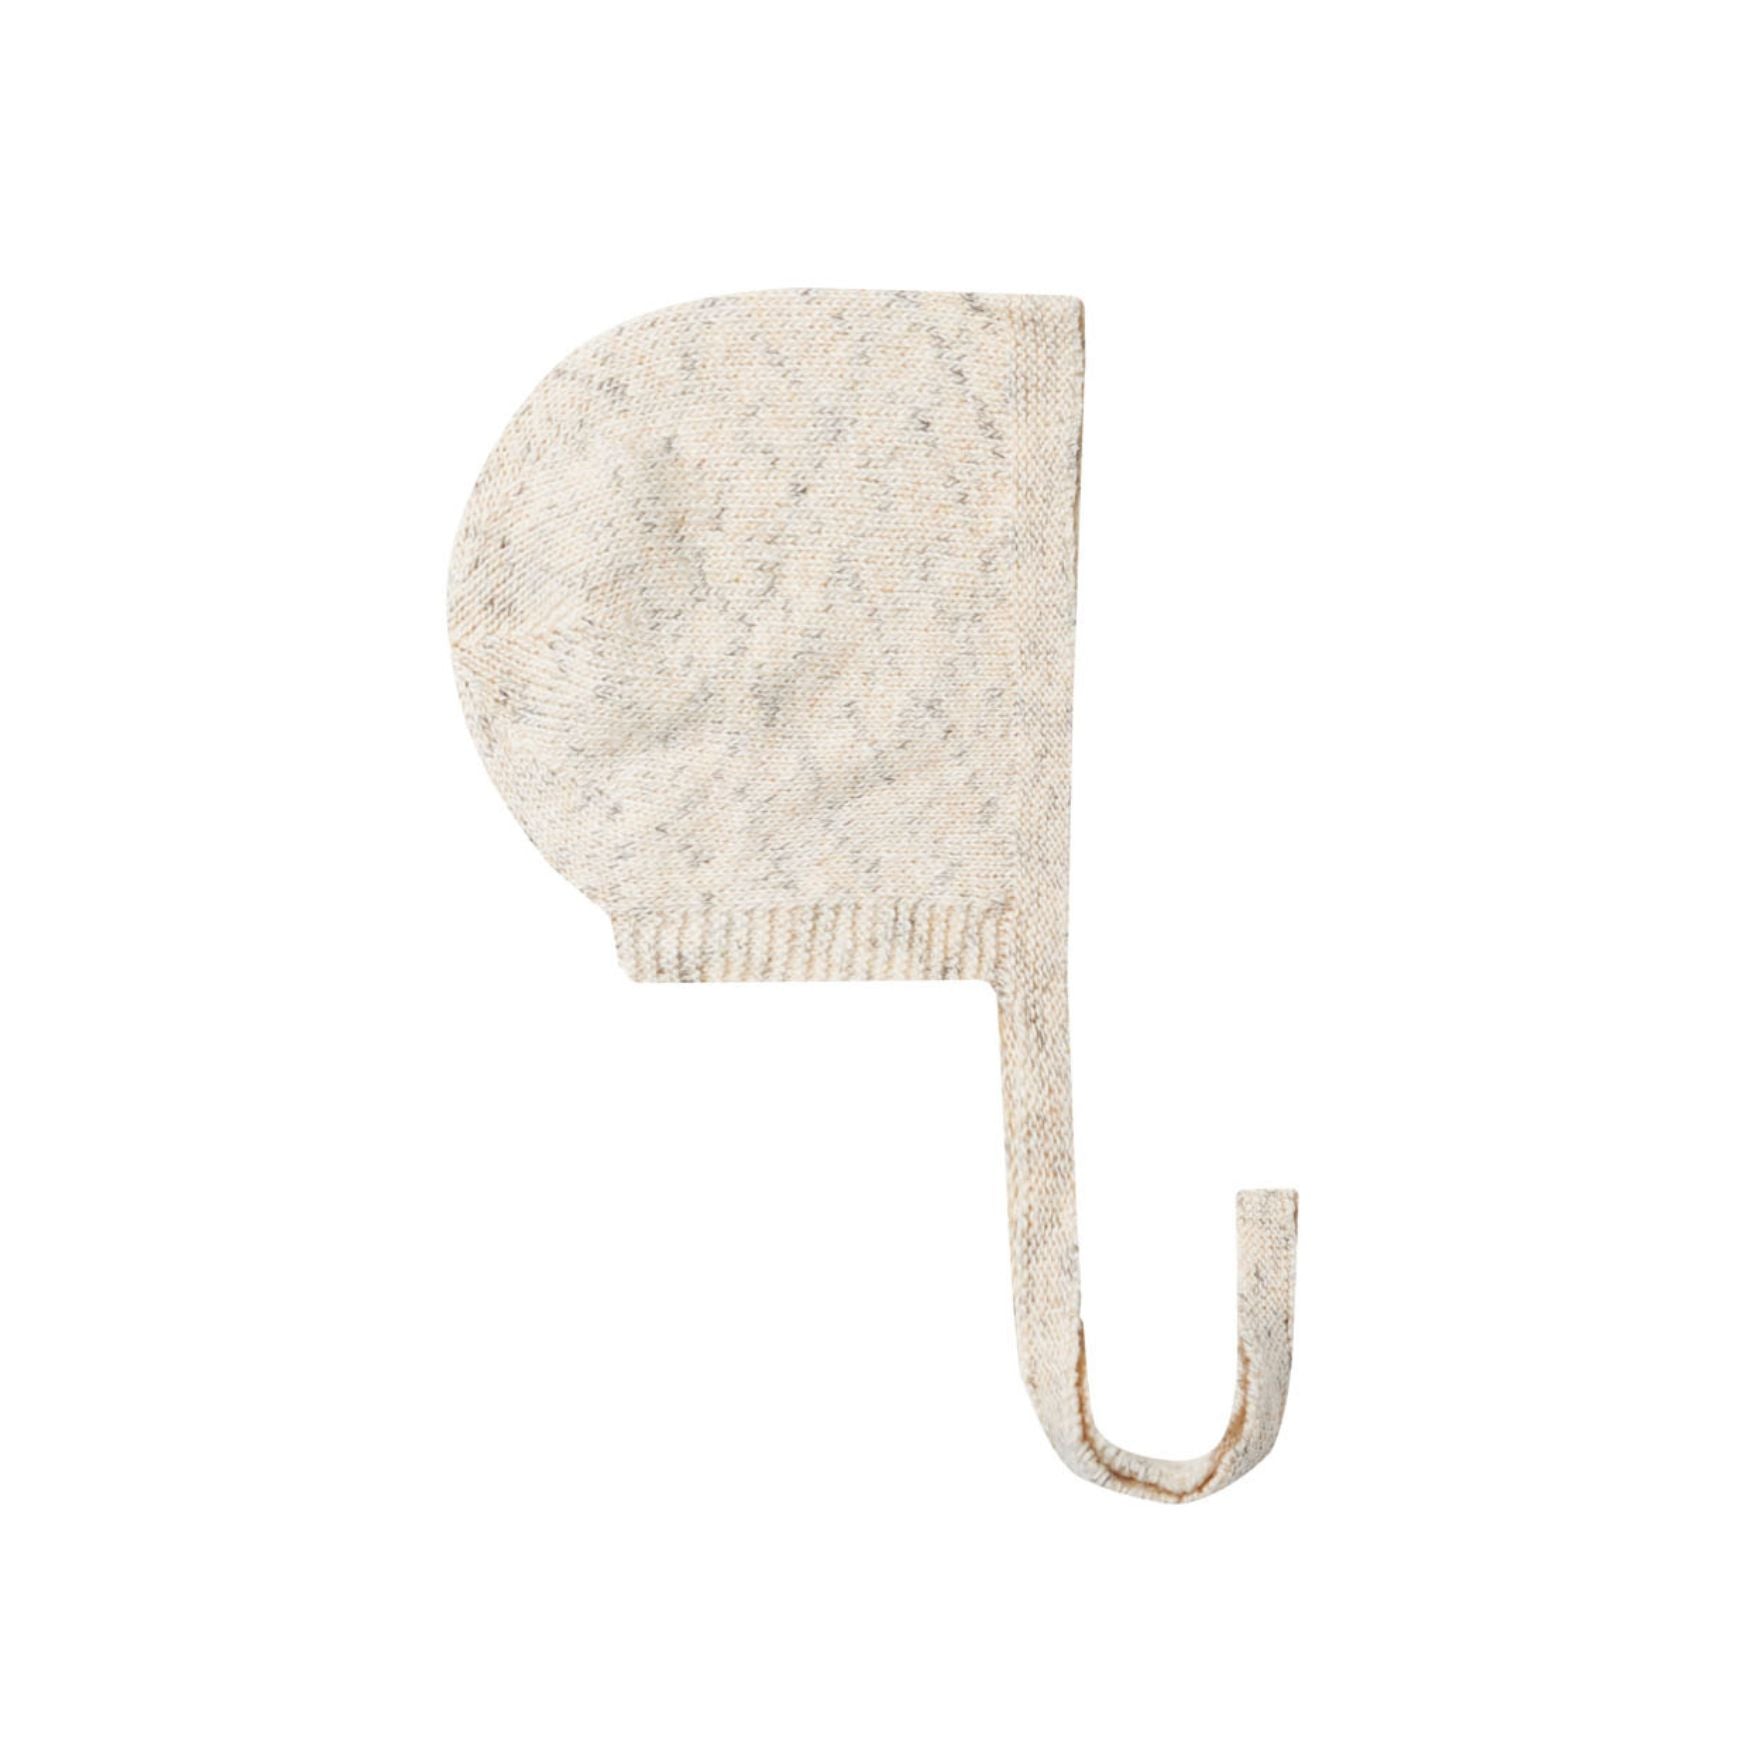 Quincy Mae Speckled Knit Bonnet - Natural Speckled